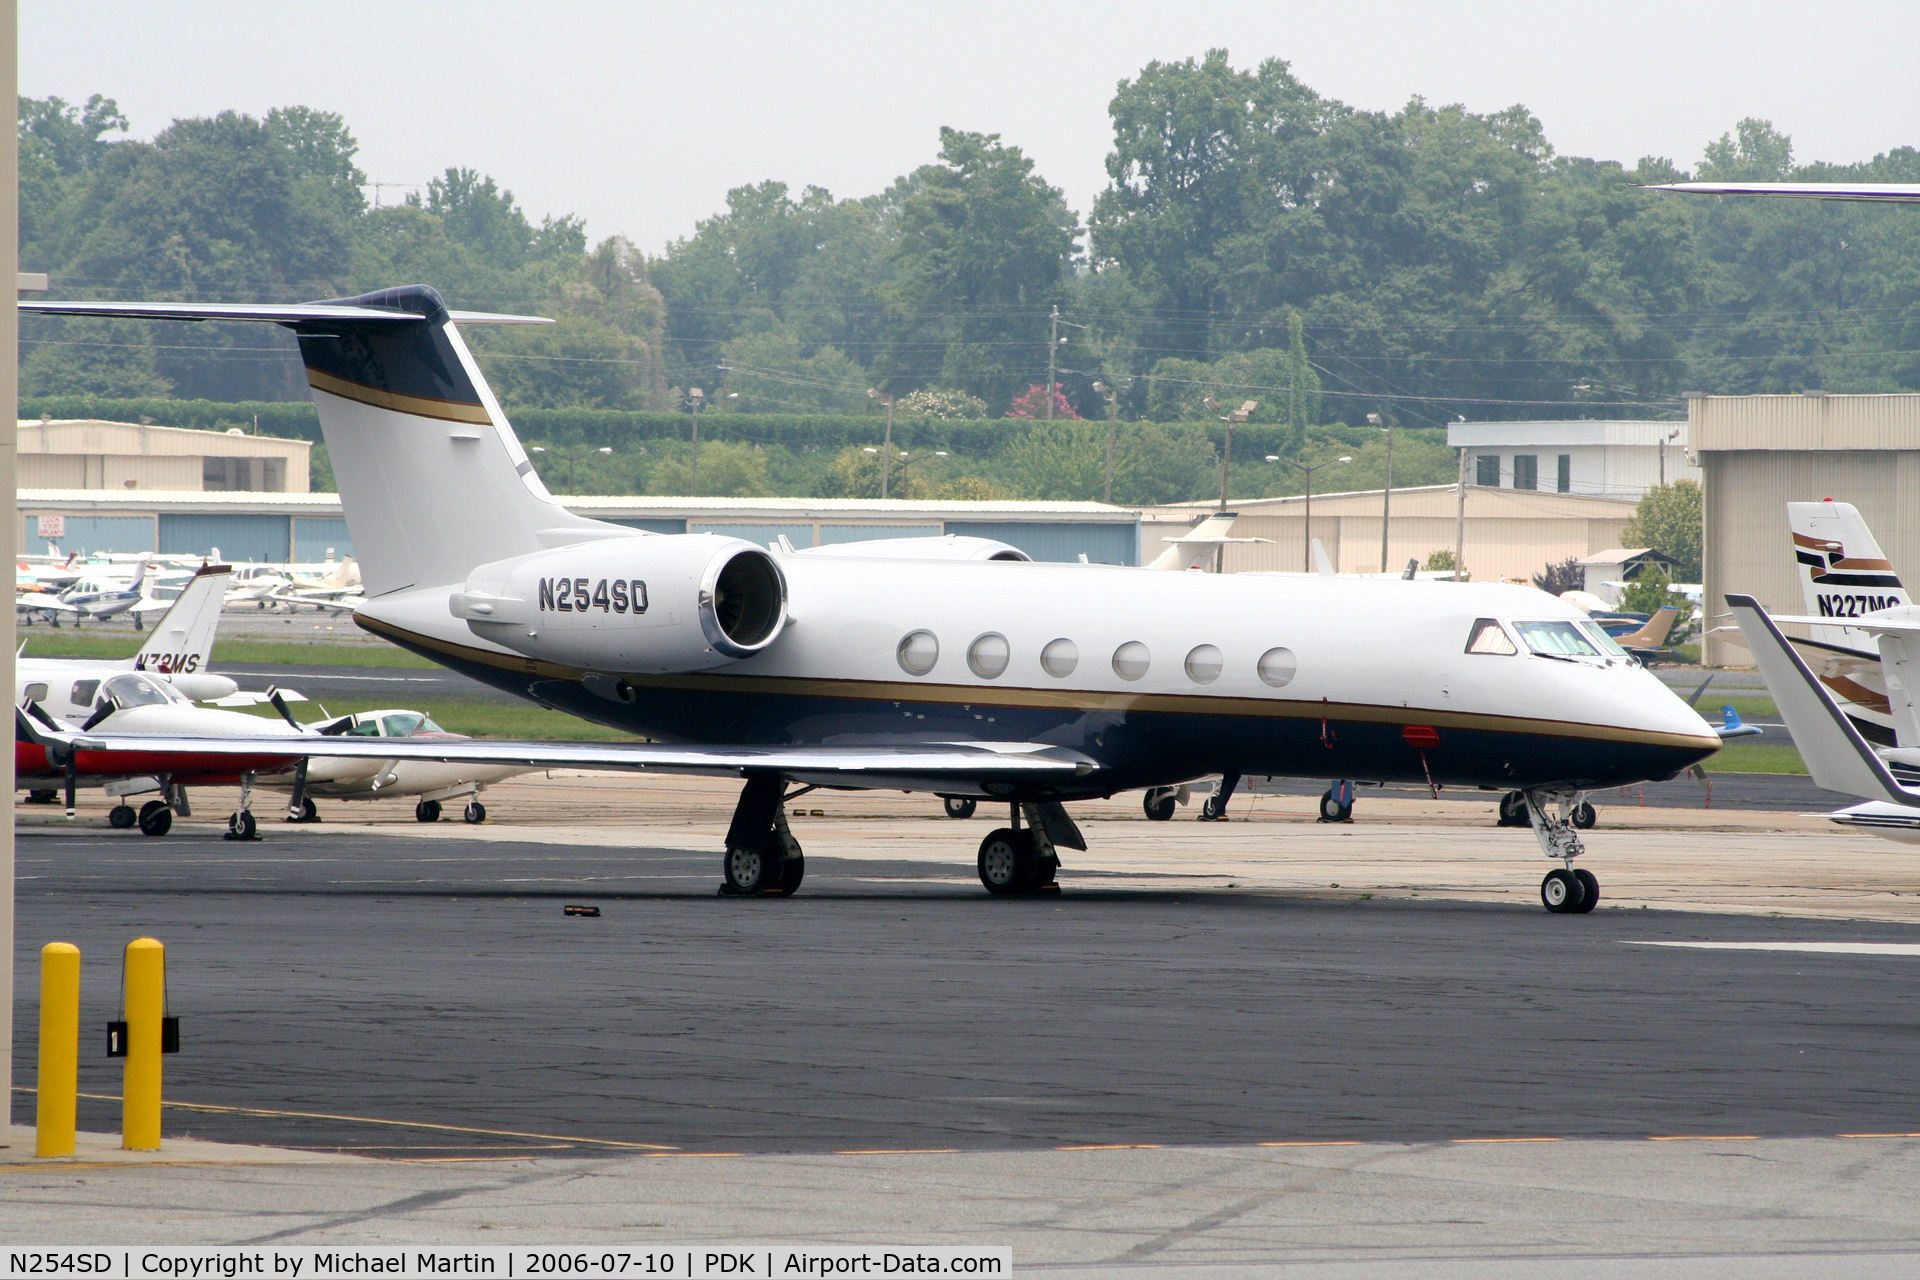 N254SD, 1999 Gulfstream Aerospace Gulfstream IVSP C/N 1387, Tied down @ Epps with other aircraft